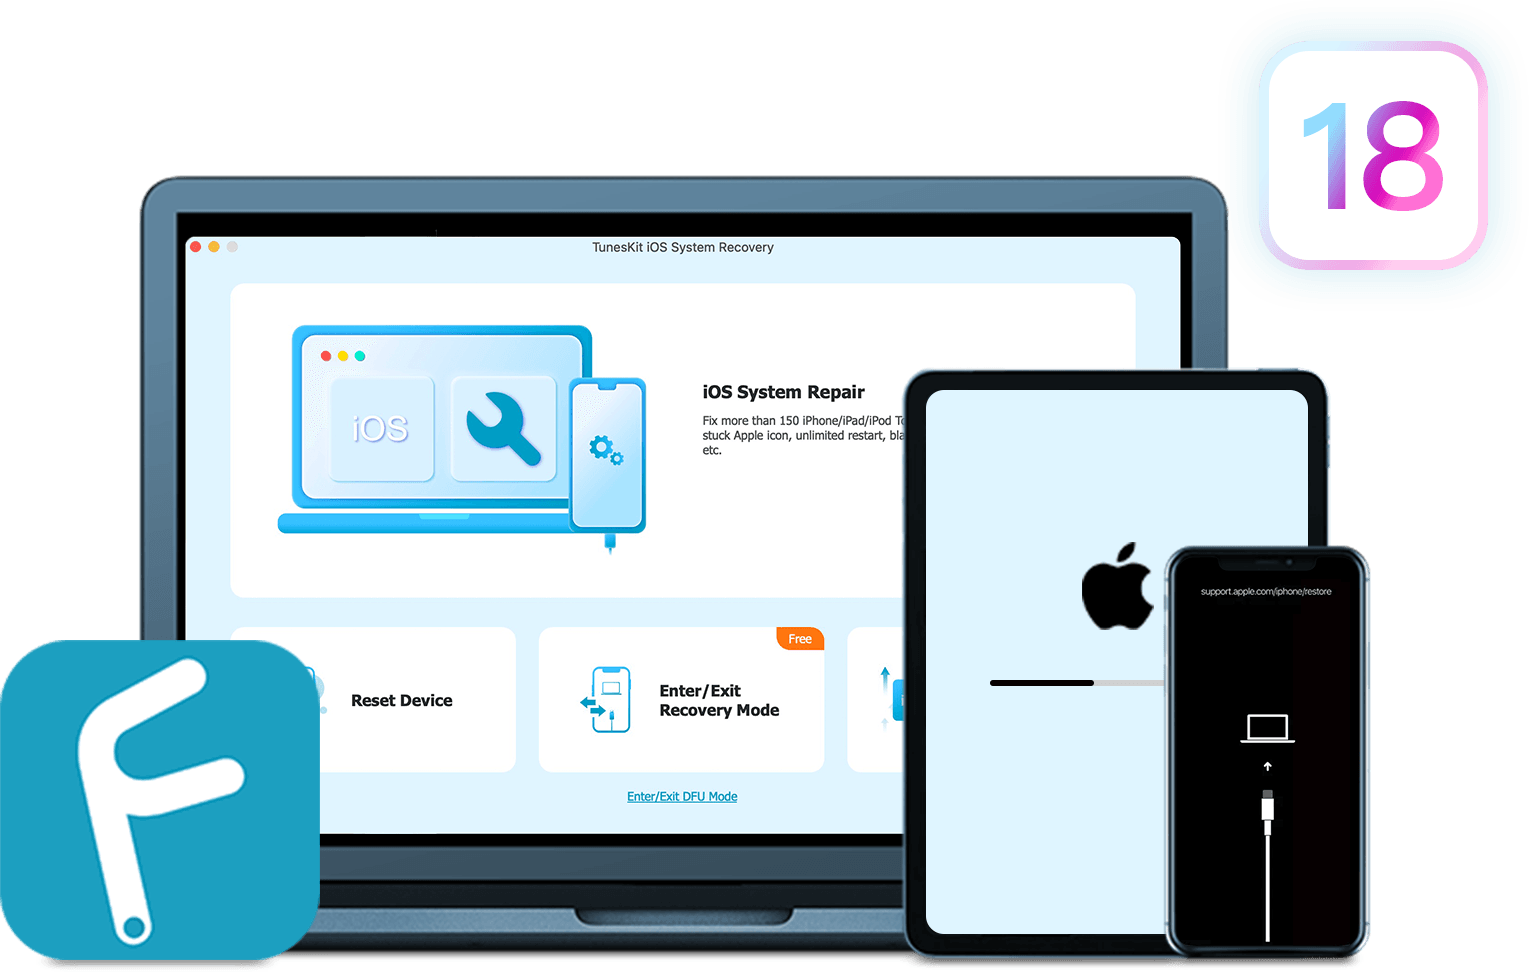 tuneskit ios system recovery for mac